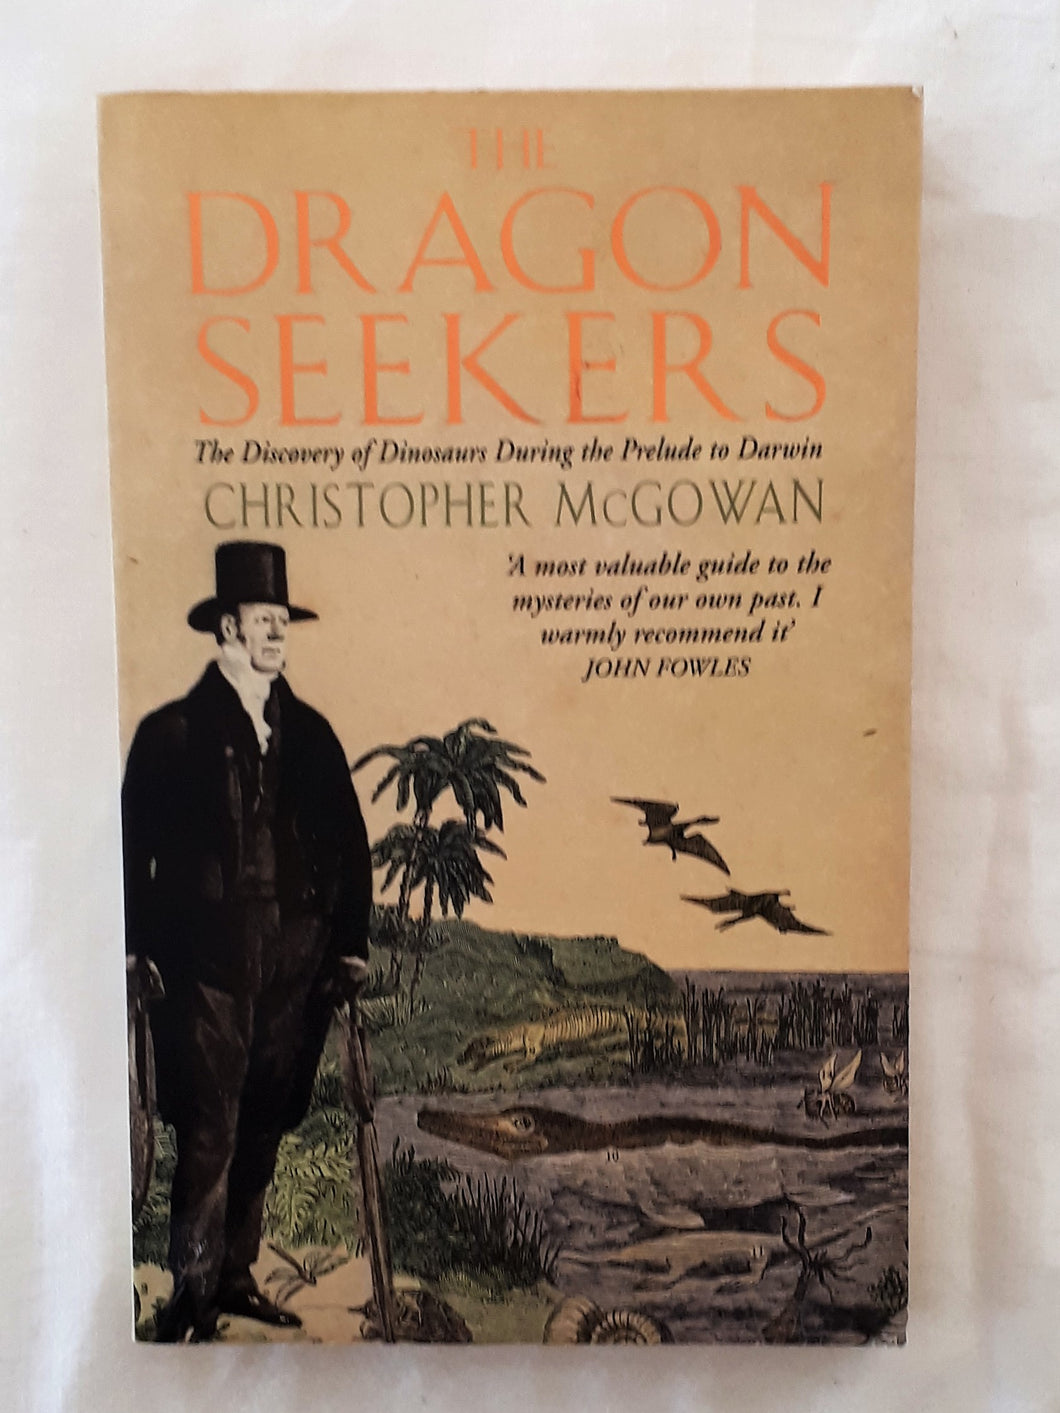 The Dragon Seekers by Christopher McGowan